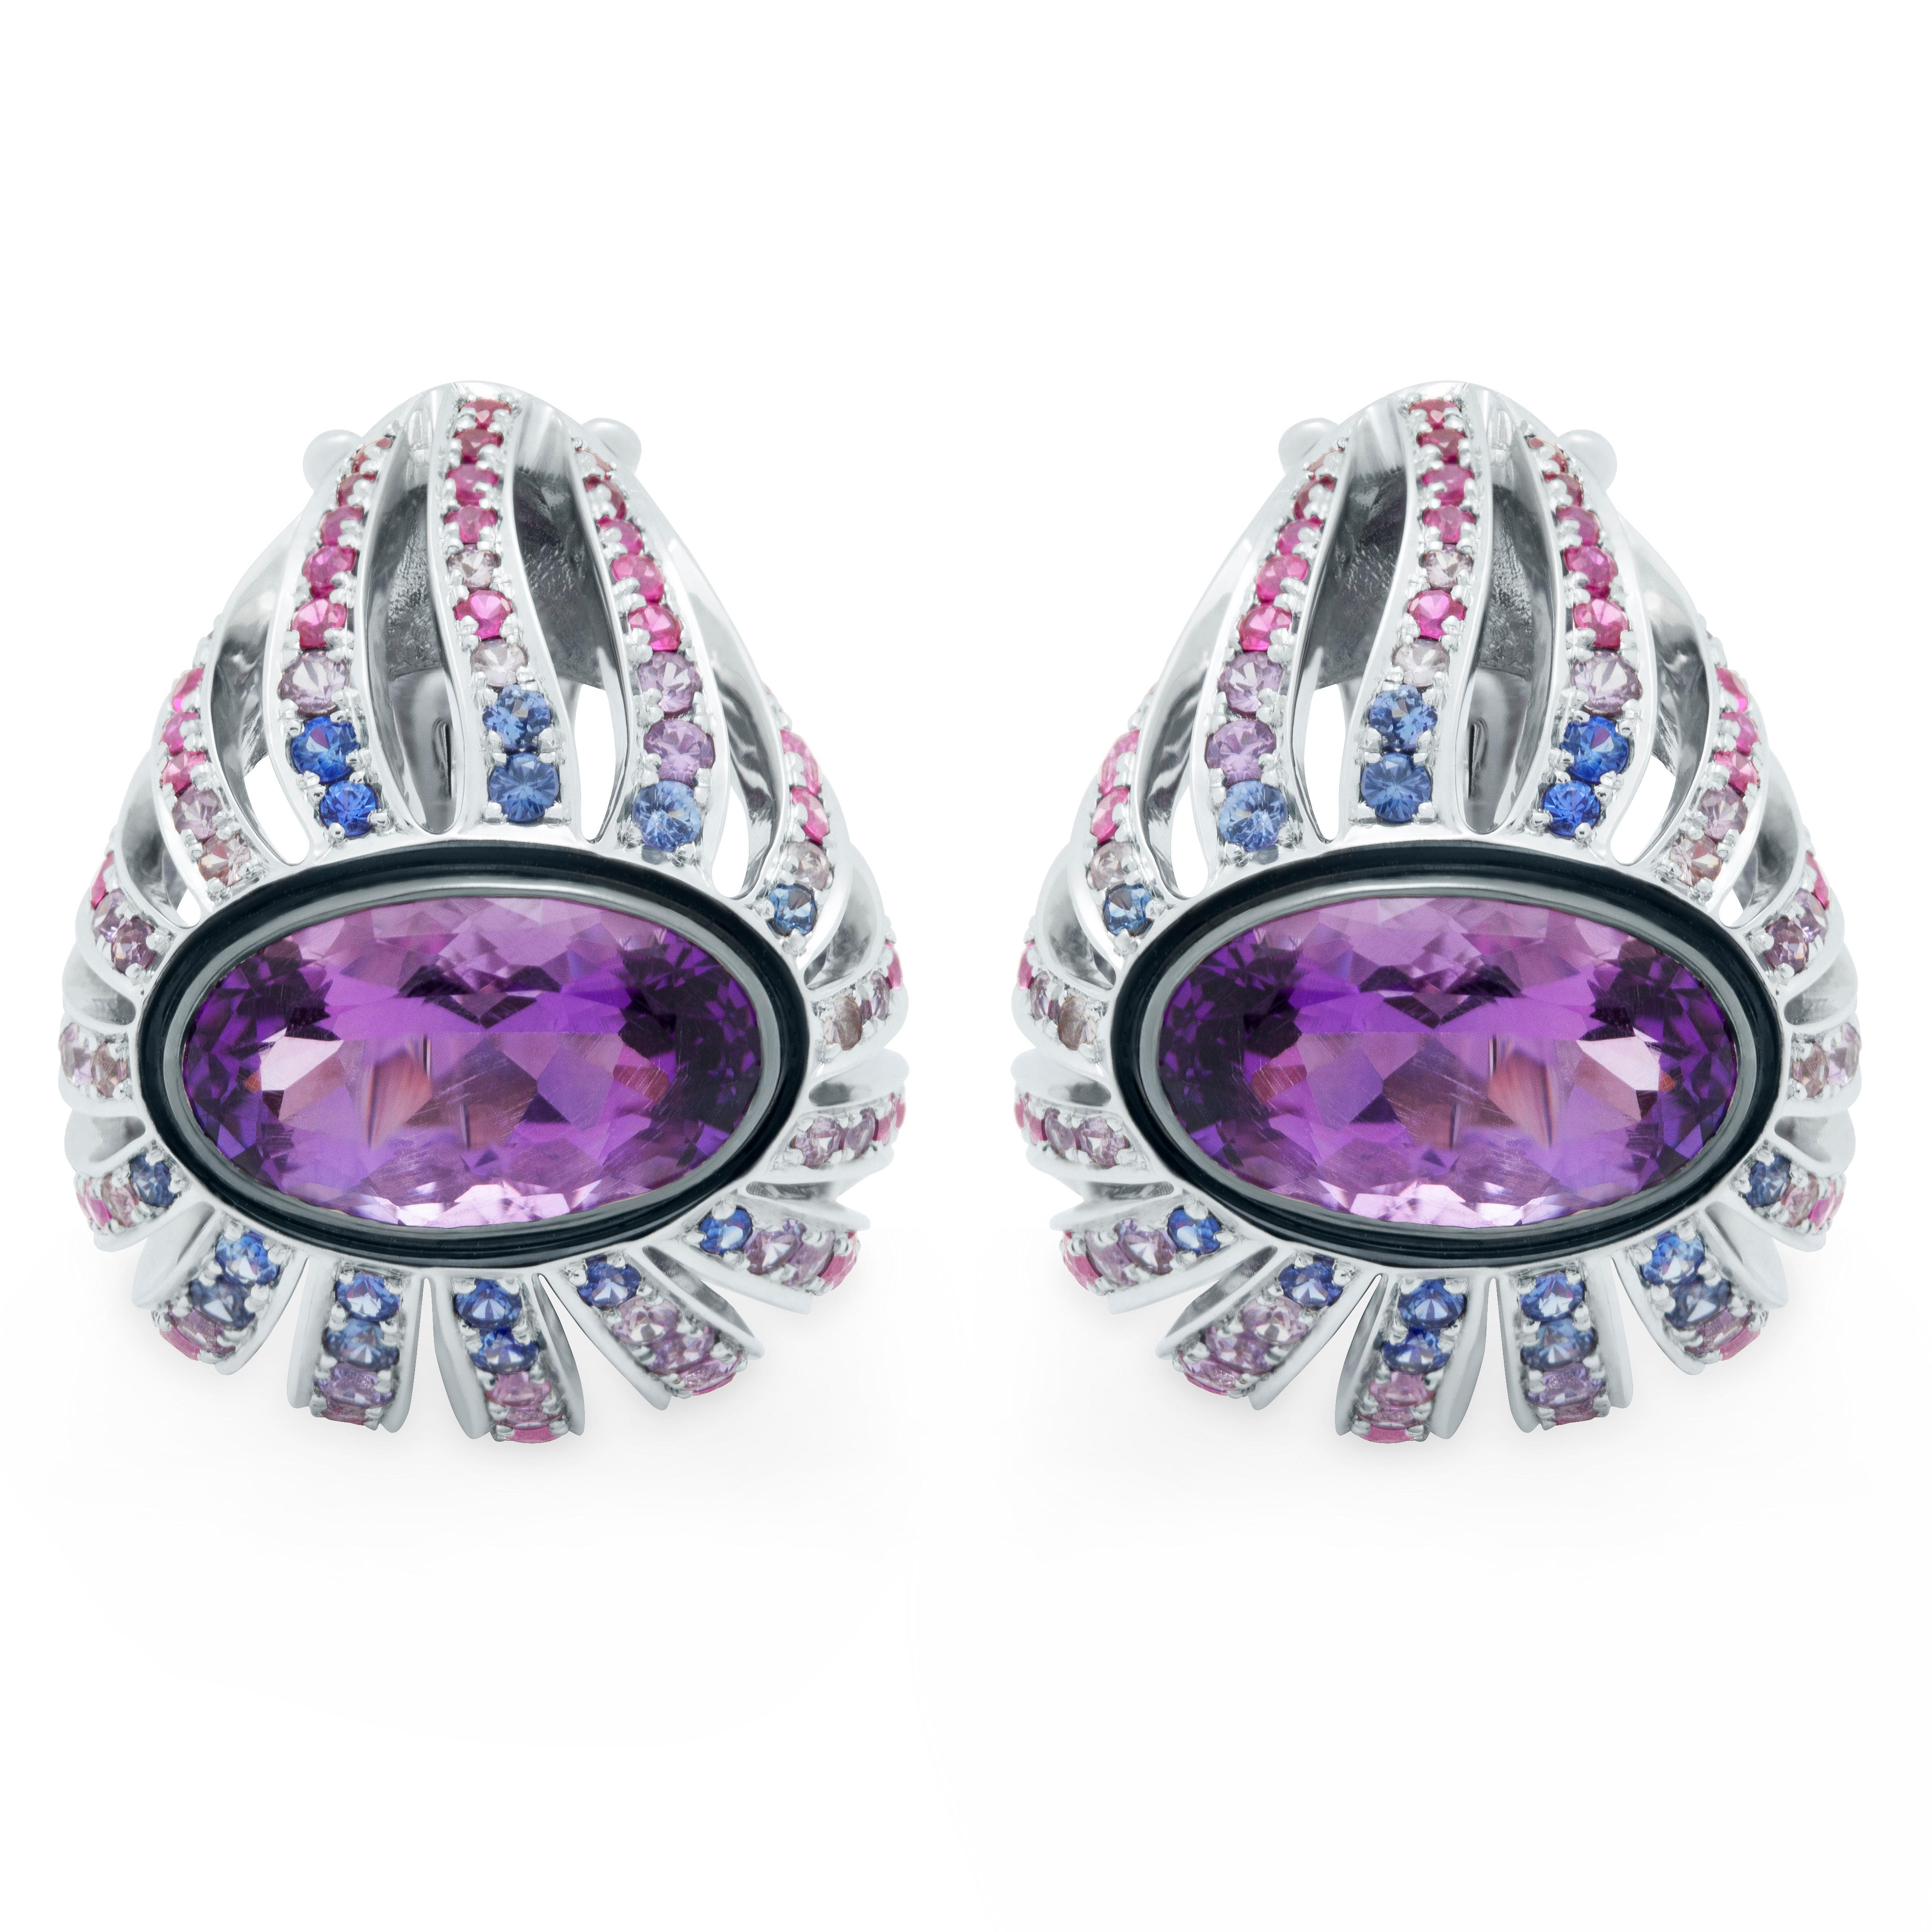 Amethyst 4.07 Carat Rubies Sapphires 18 Karat White Gold New Age Earrings
An incredibly bright two Oval-shape 4.07 Carat Amethysts, from which many 18 Karat White Gold paths slide down, where Pink, Blue and Purple Sapphires weighing total 1.44 Carat